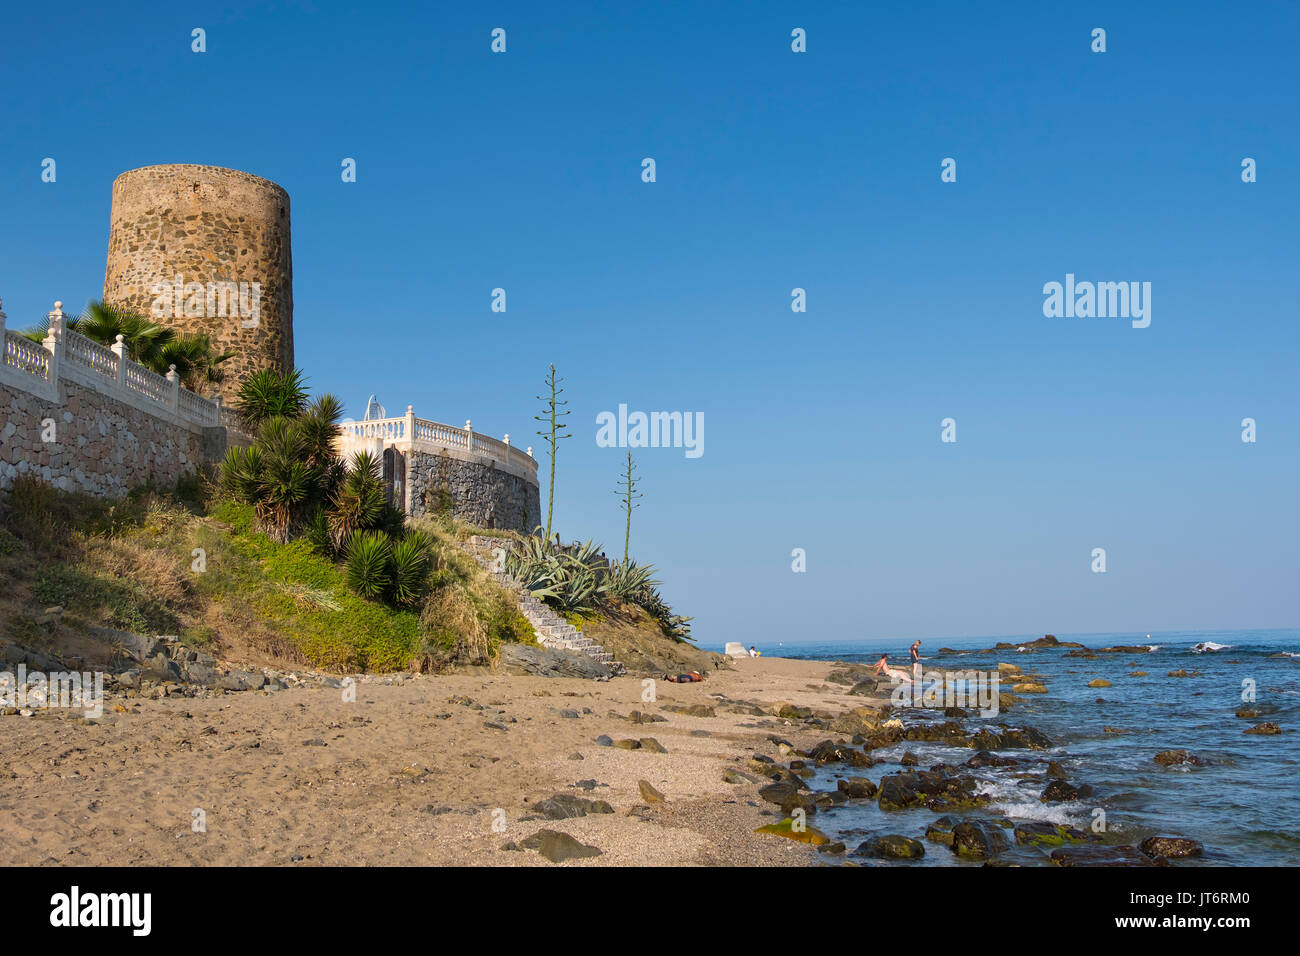 Watchtower and beach, La Cala de Mijas. Costa del Sol, Málaga province. Andalusia, Southern Spain Europe Stock Photo